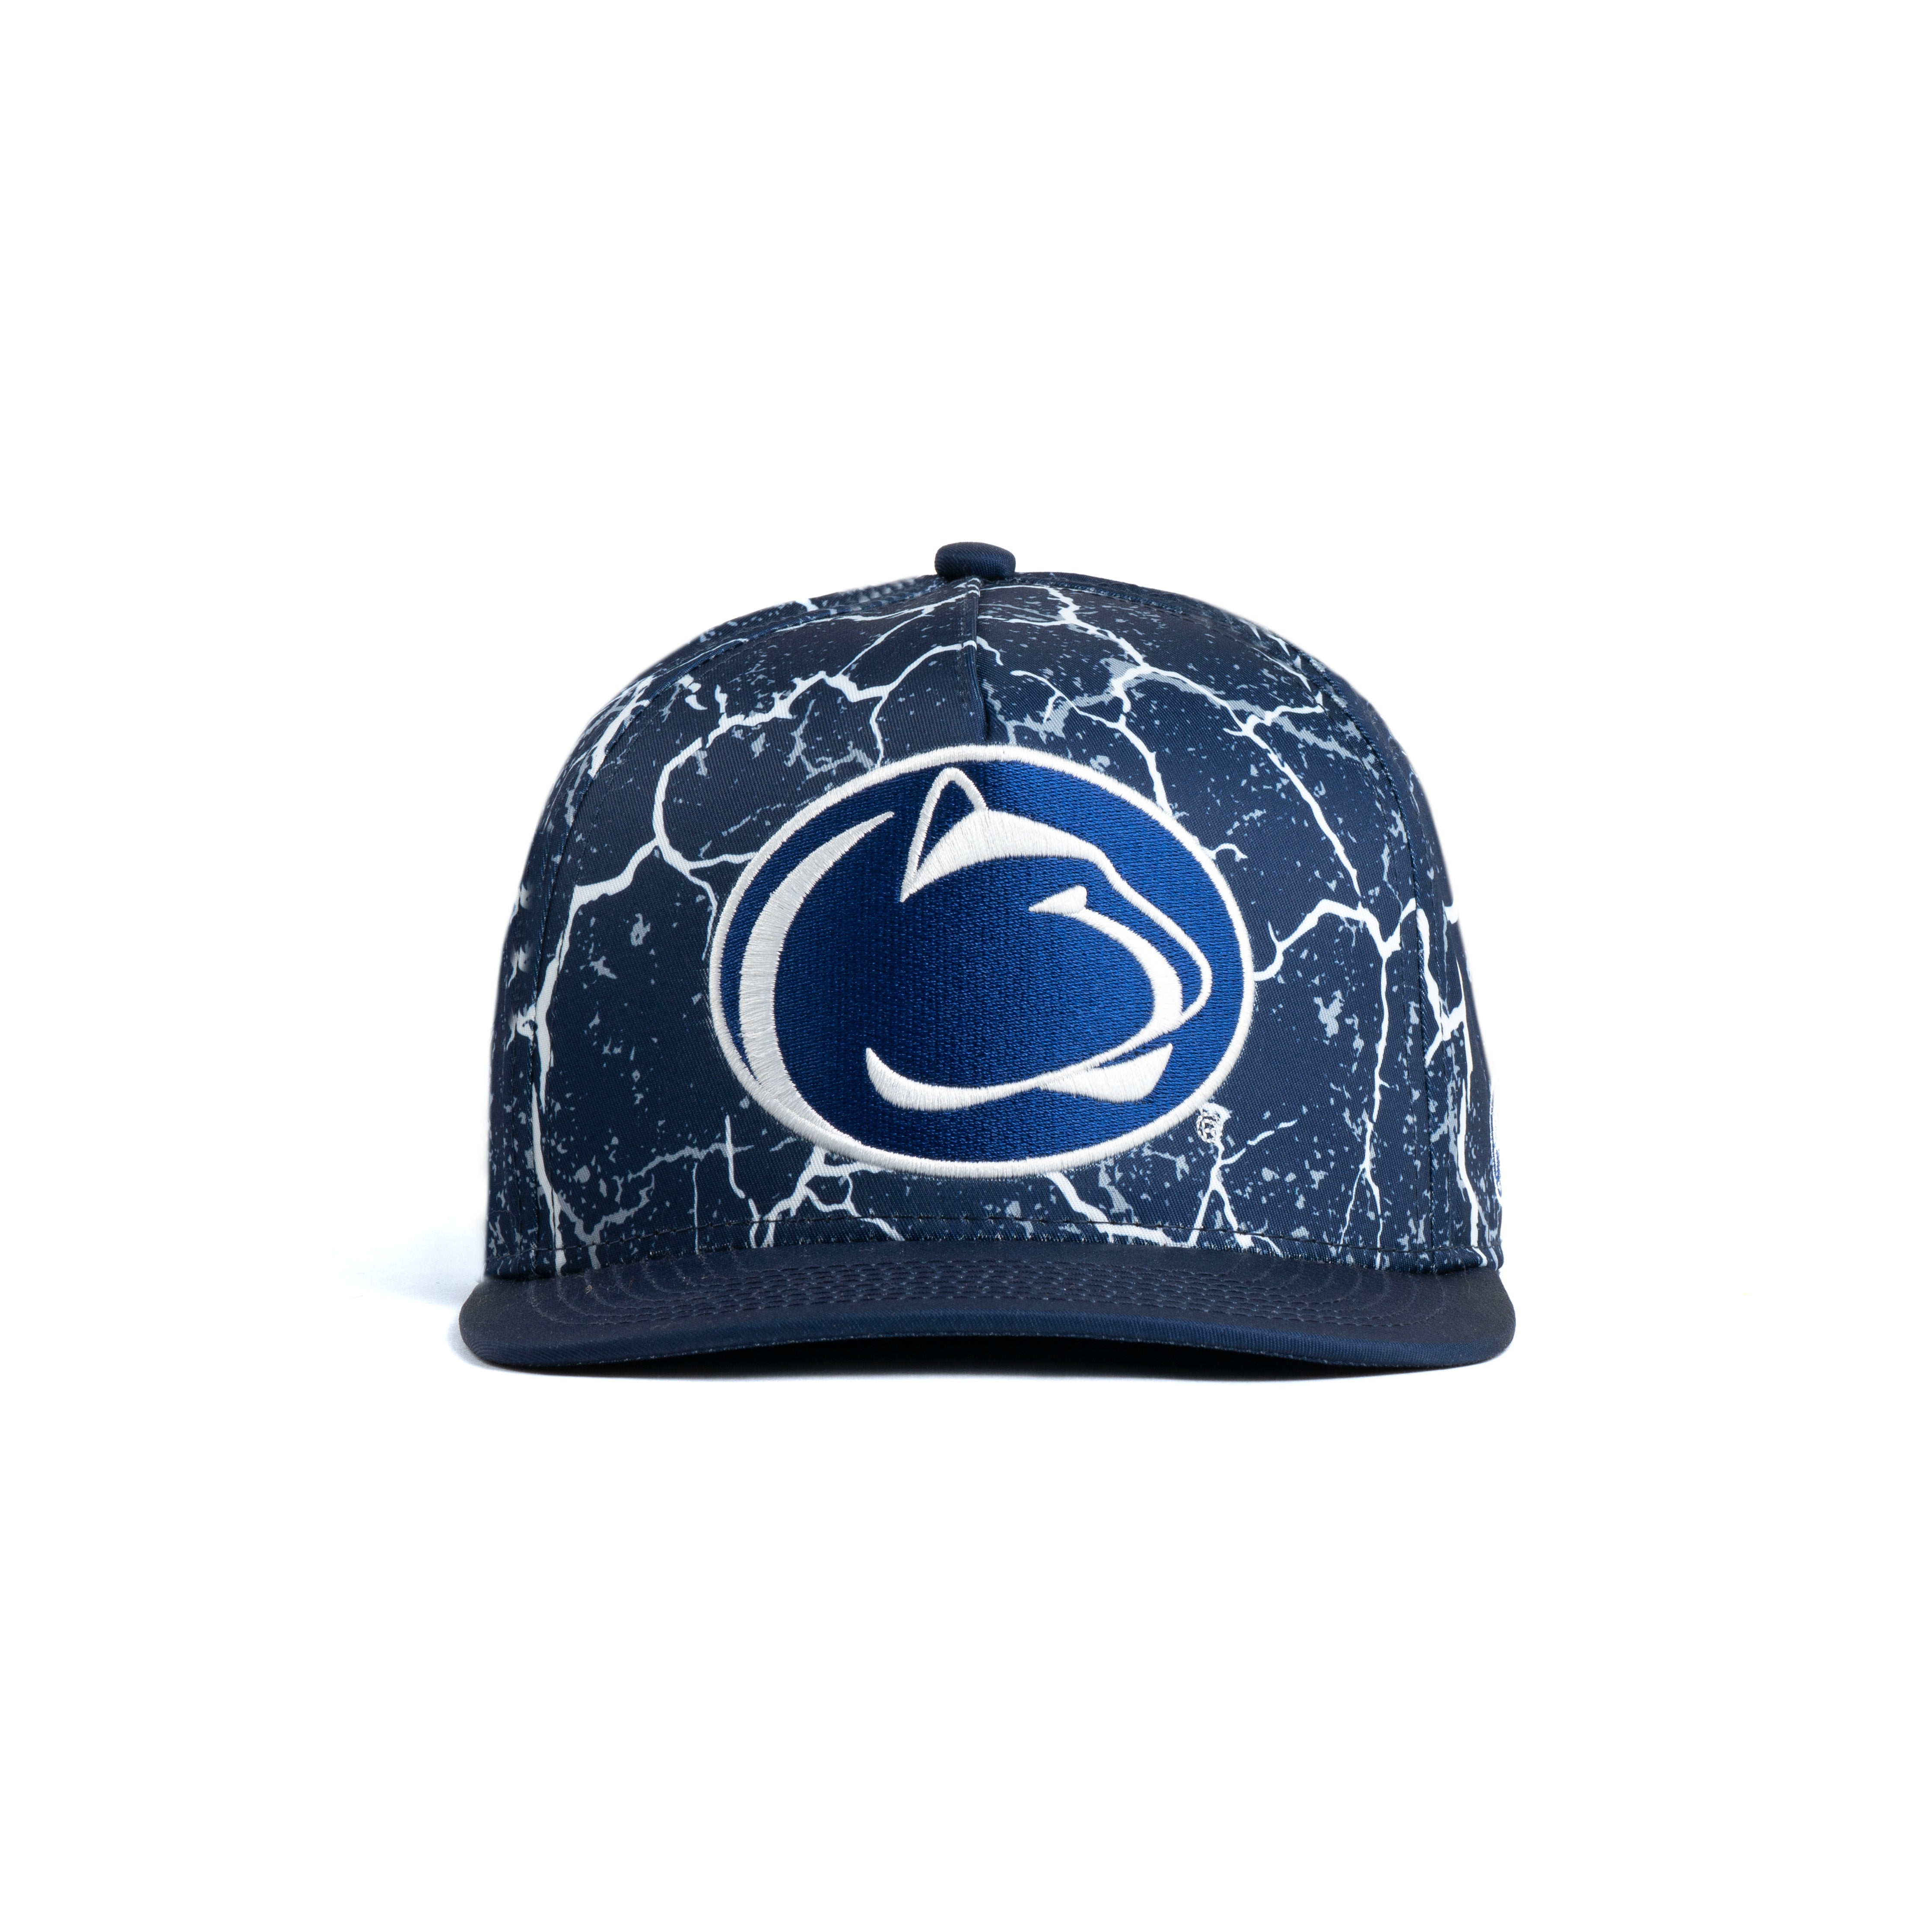 Penn State Nittany Lions Storm Snapback